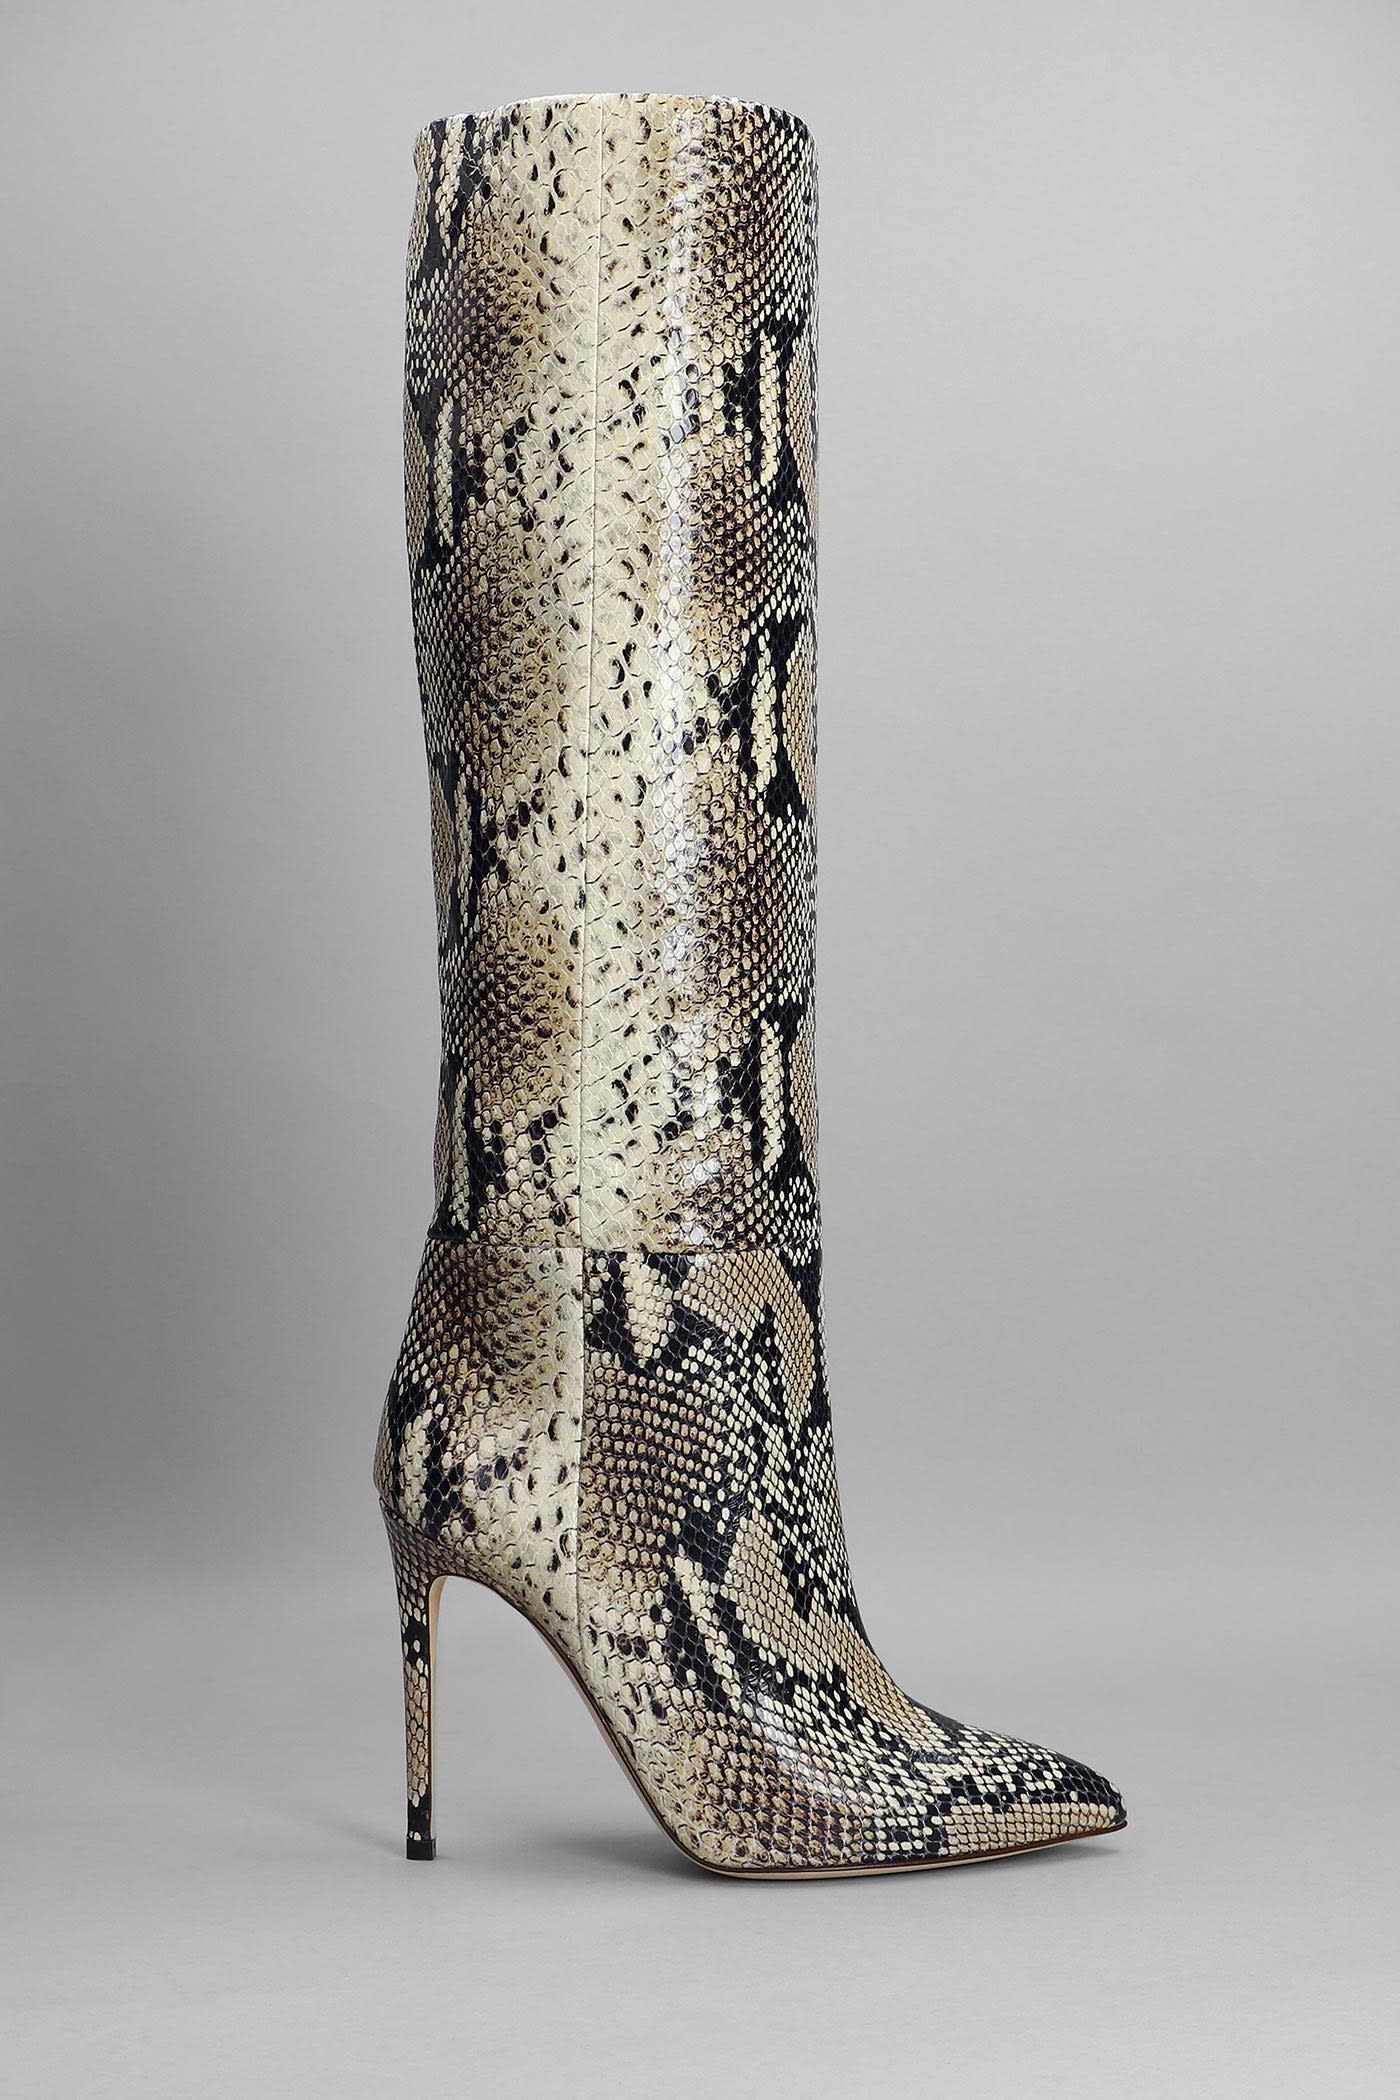 Paris Texas High Heels Boots In Python Print Leather